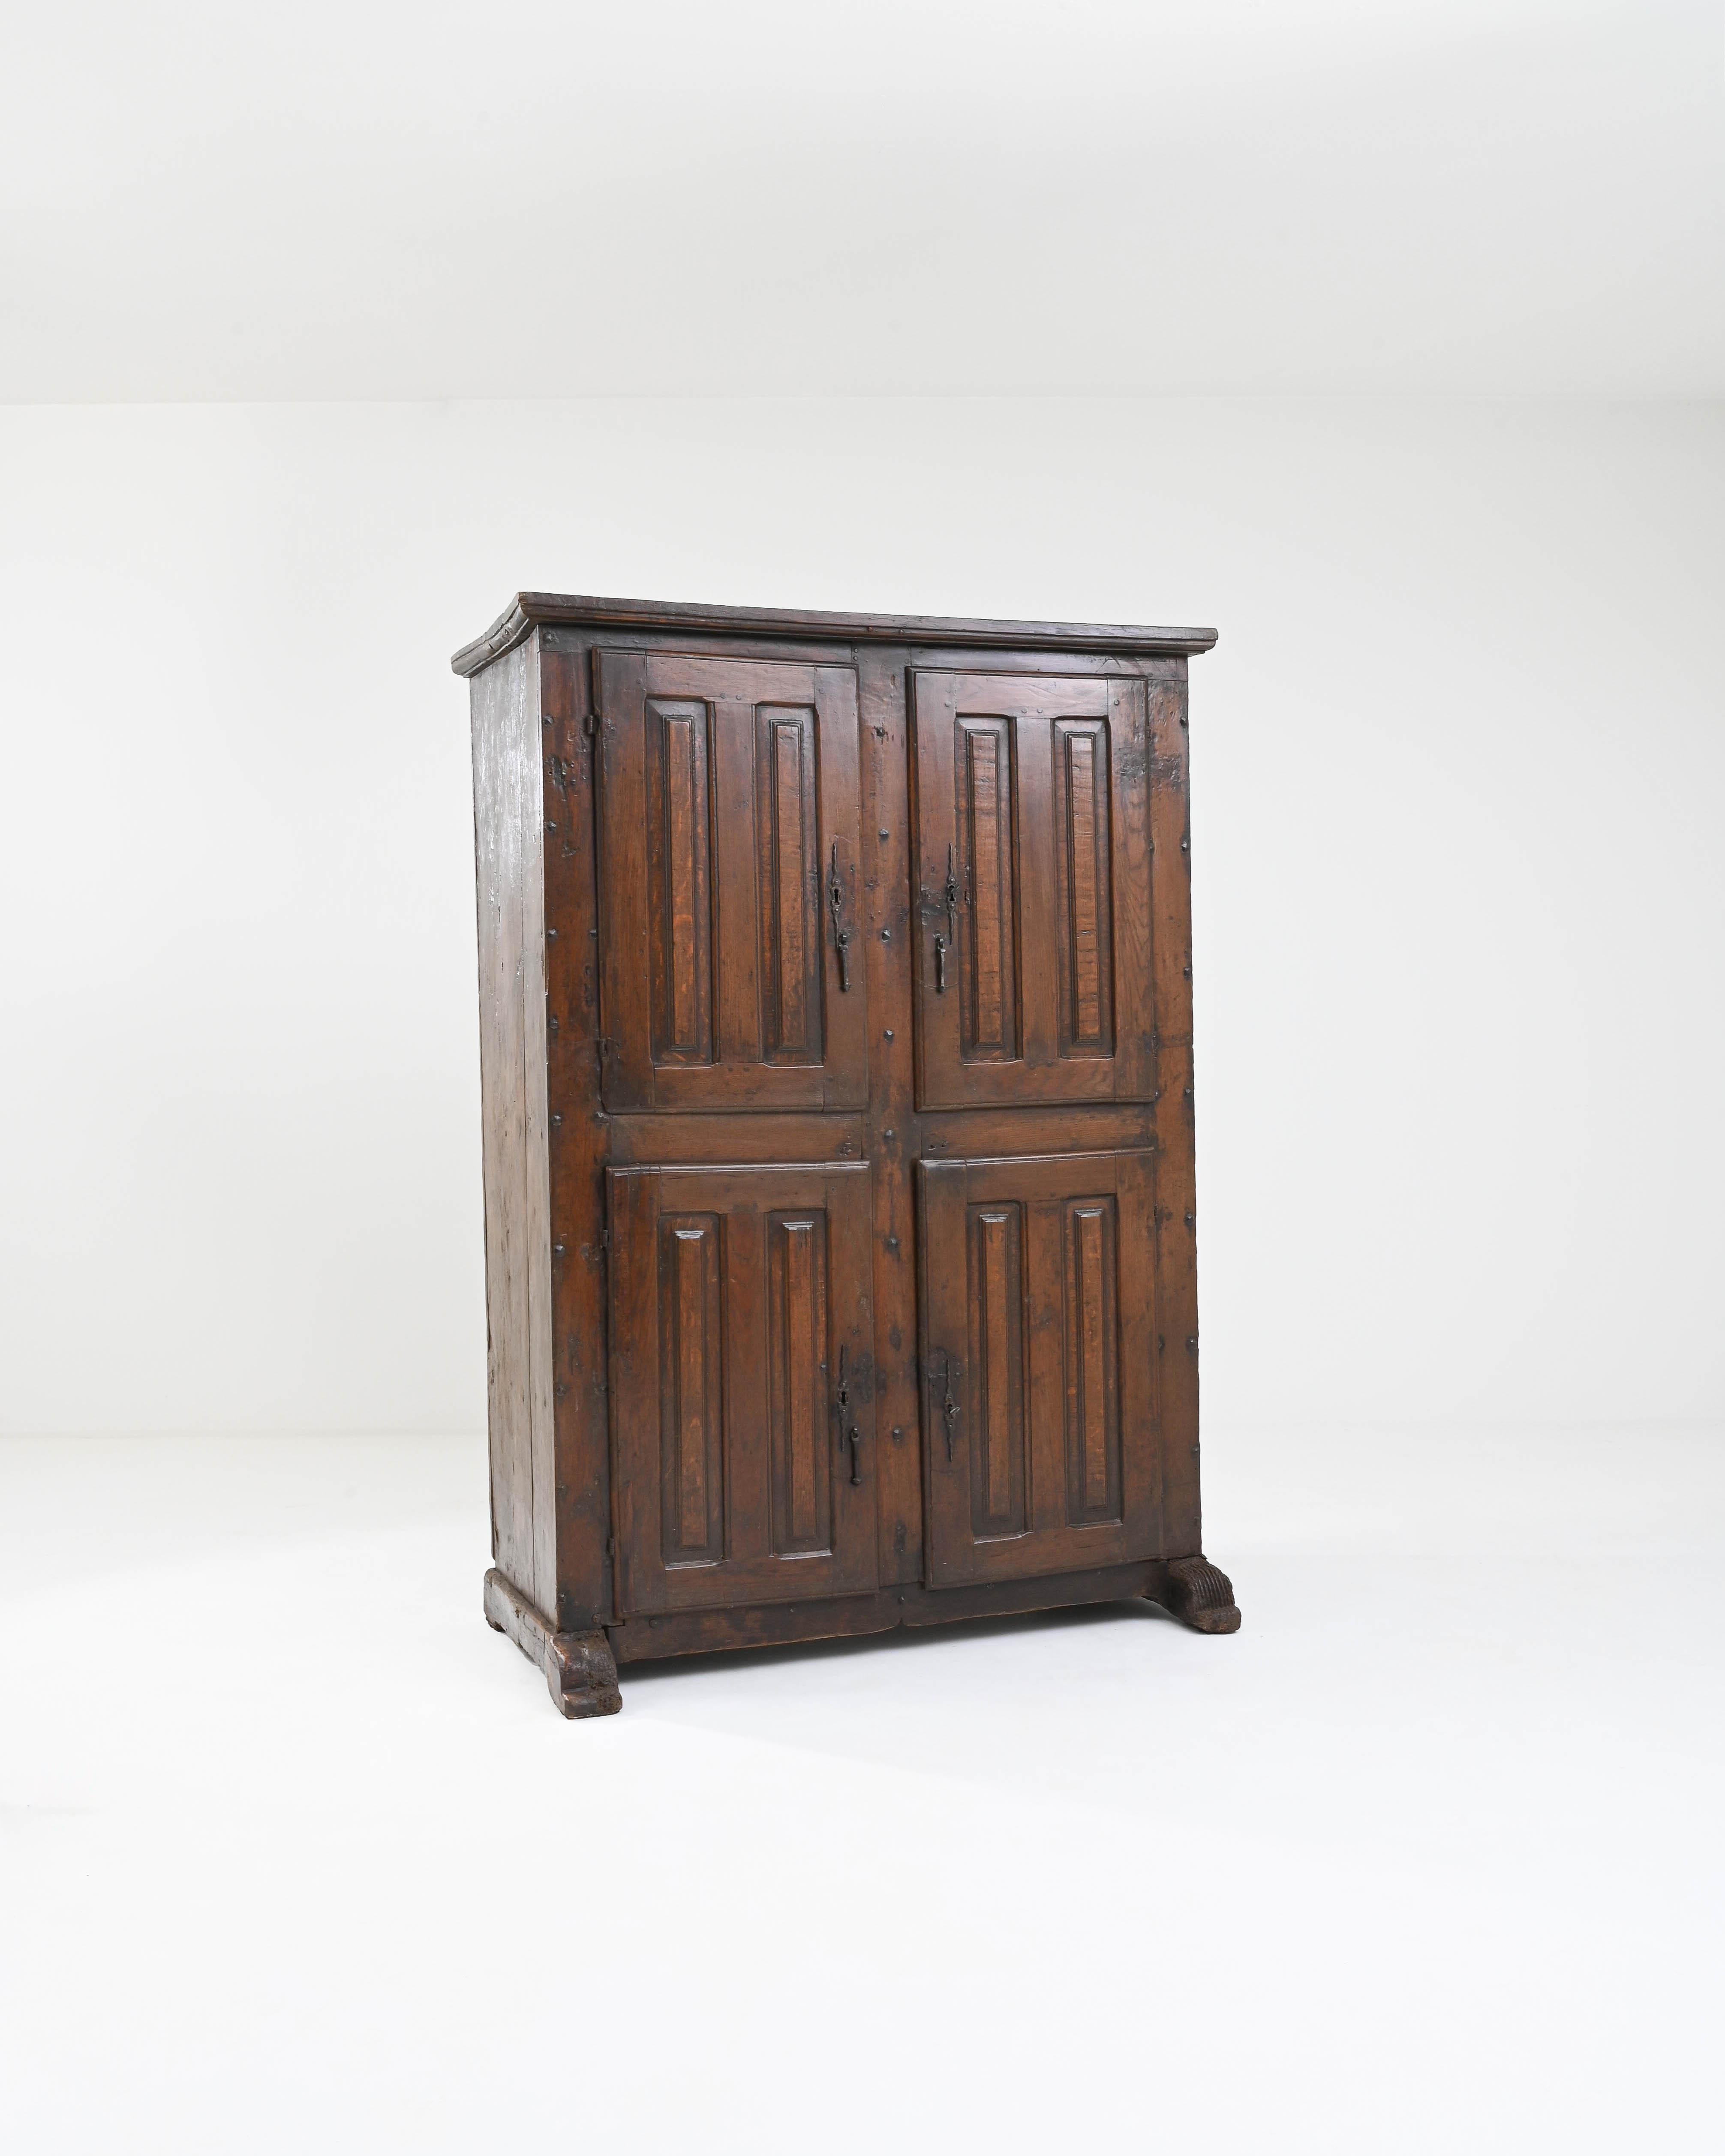 A handsome original patina gives this antique cabinet a unique character. Built in France circa 1800, the dark finish of the wood has mellowed to a rich, lacquered polish, revealing warm notes of cherry red and amber beneath. The silhouette has a